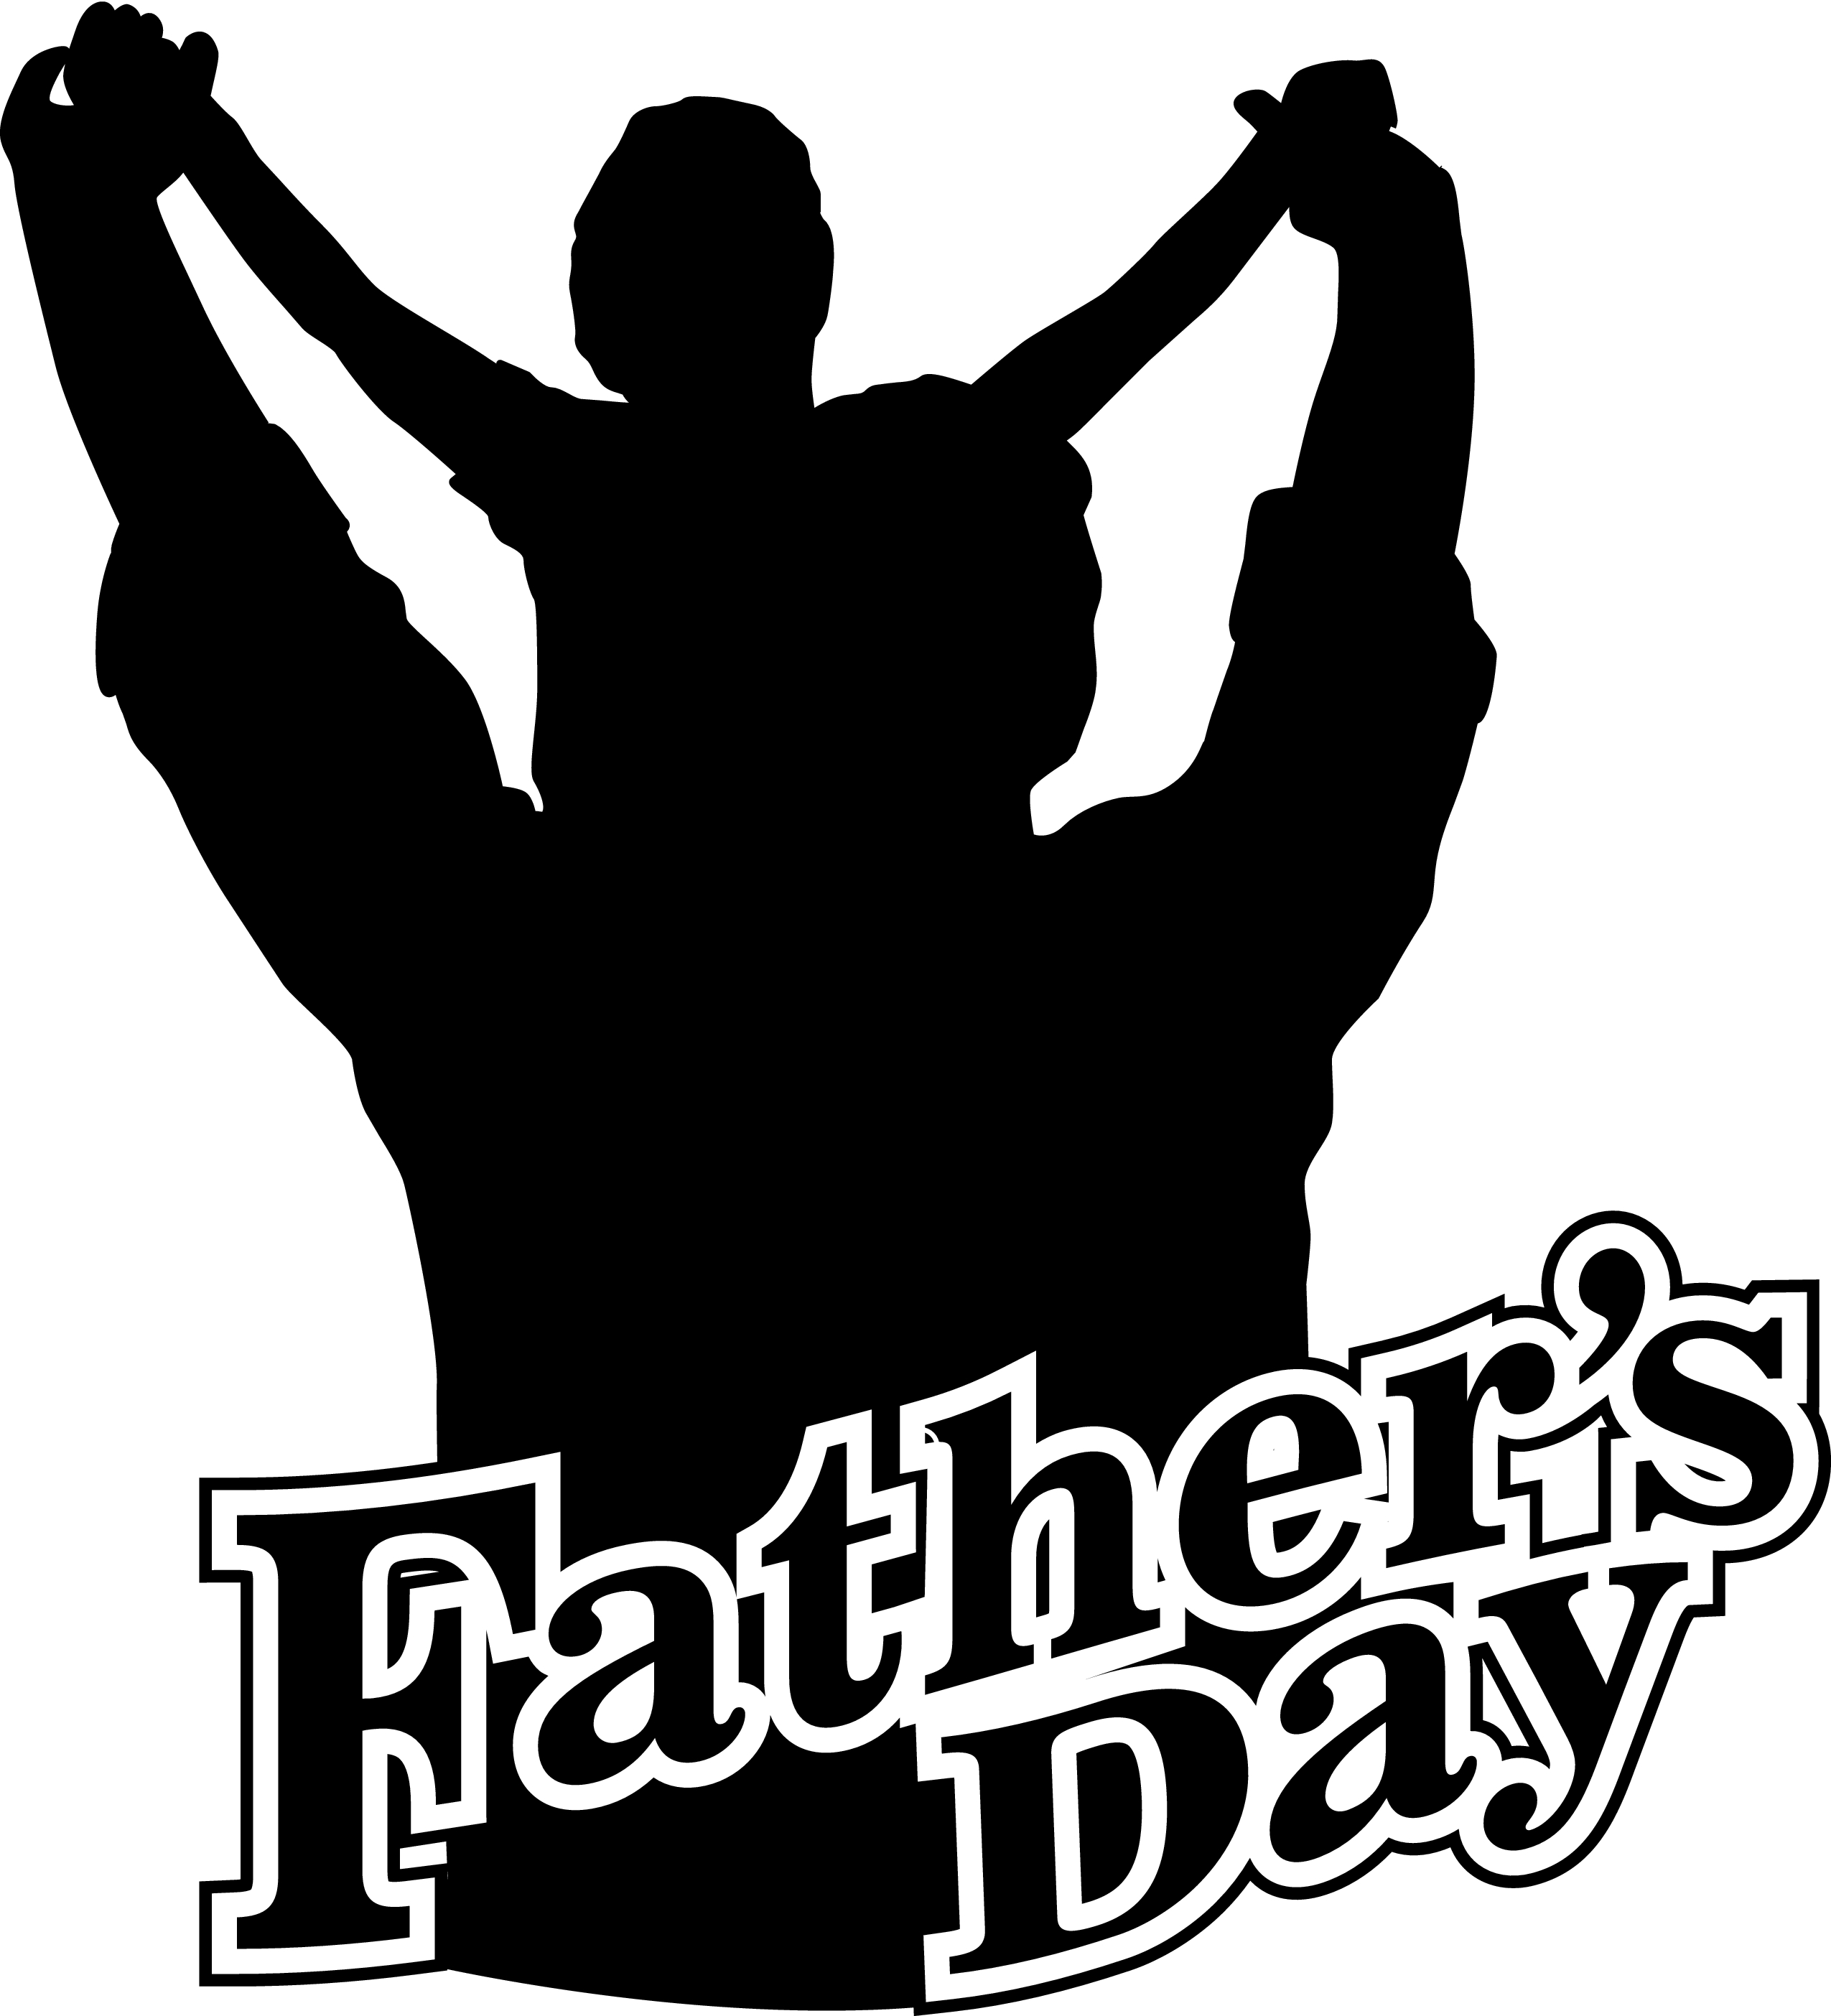 Father S Day Clip Art Free | Clipart library - Free Clipart Images